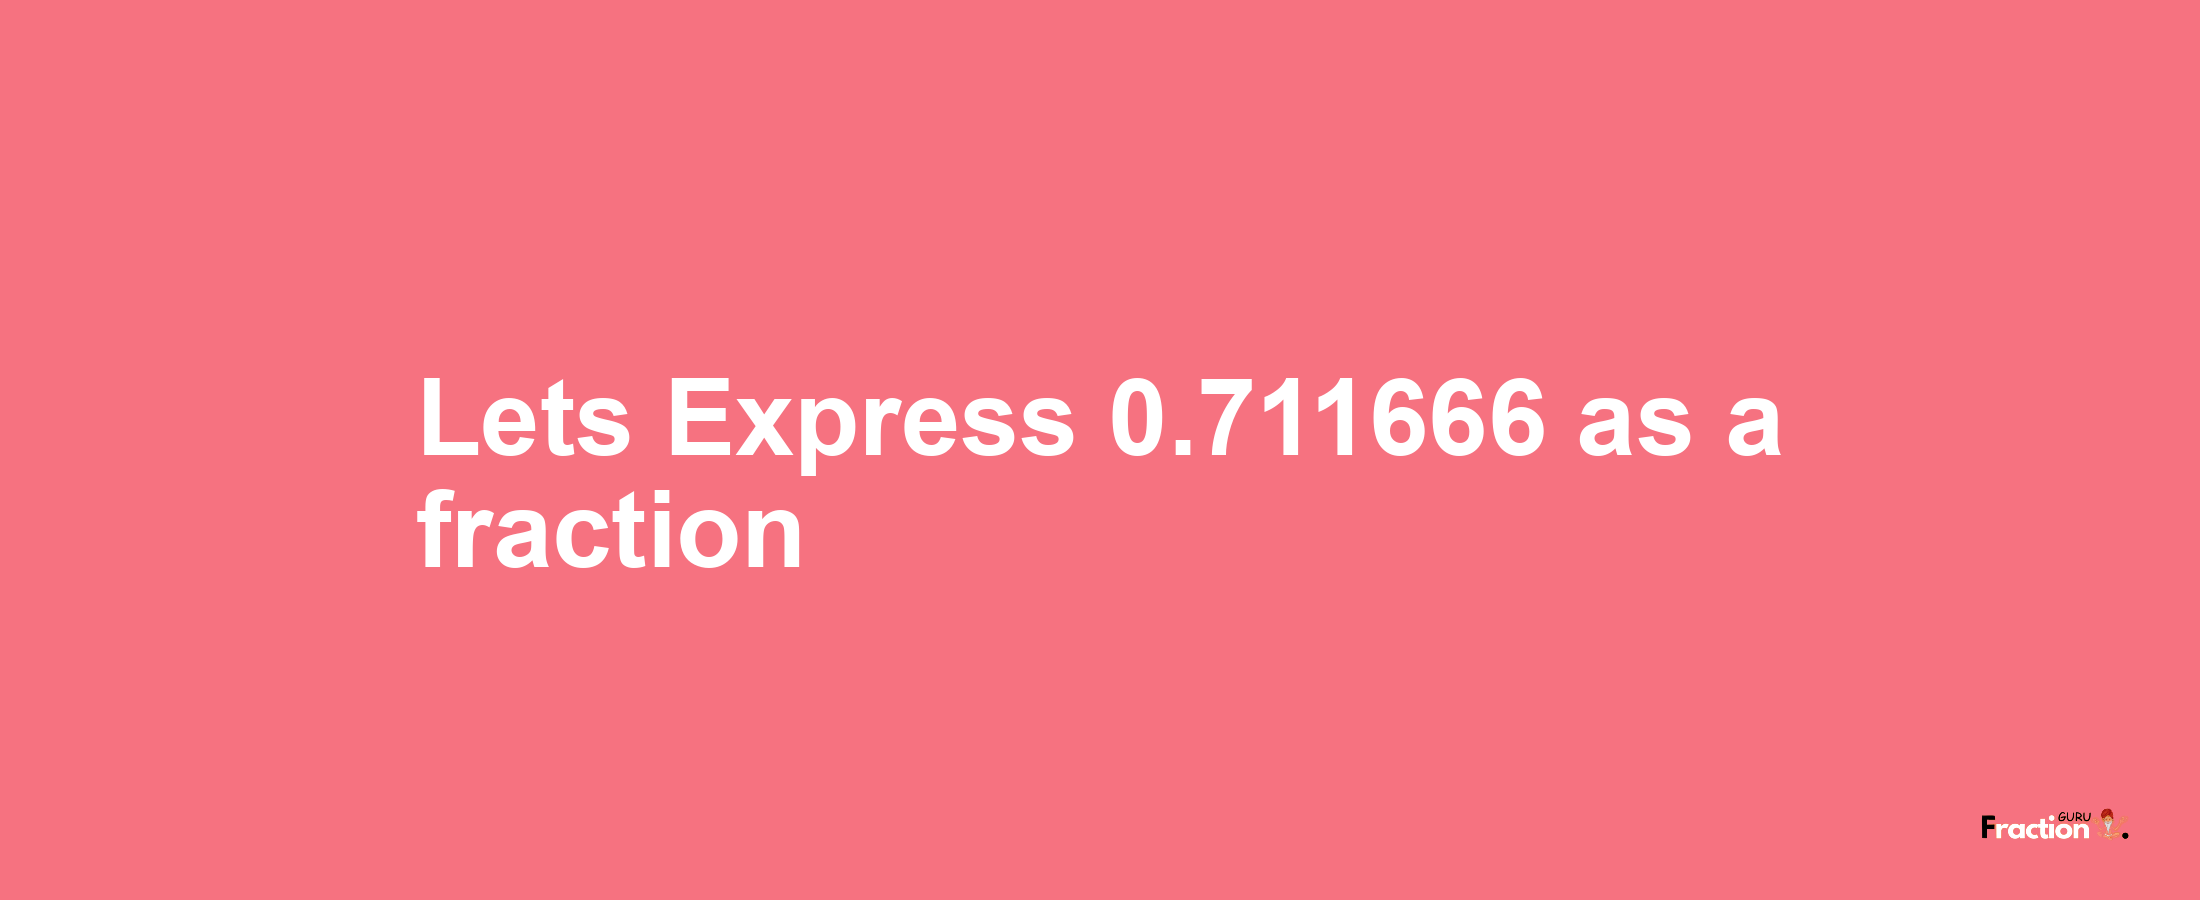 Lets Express 0.711666 as afraction